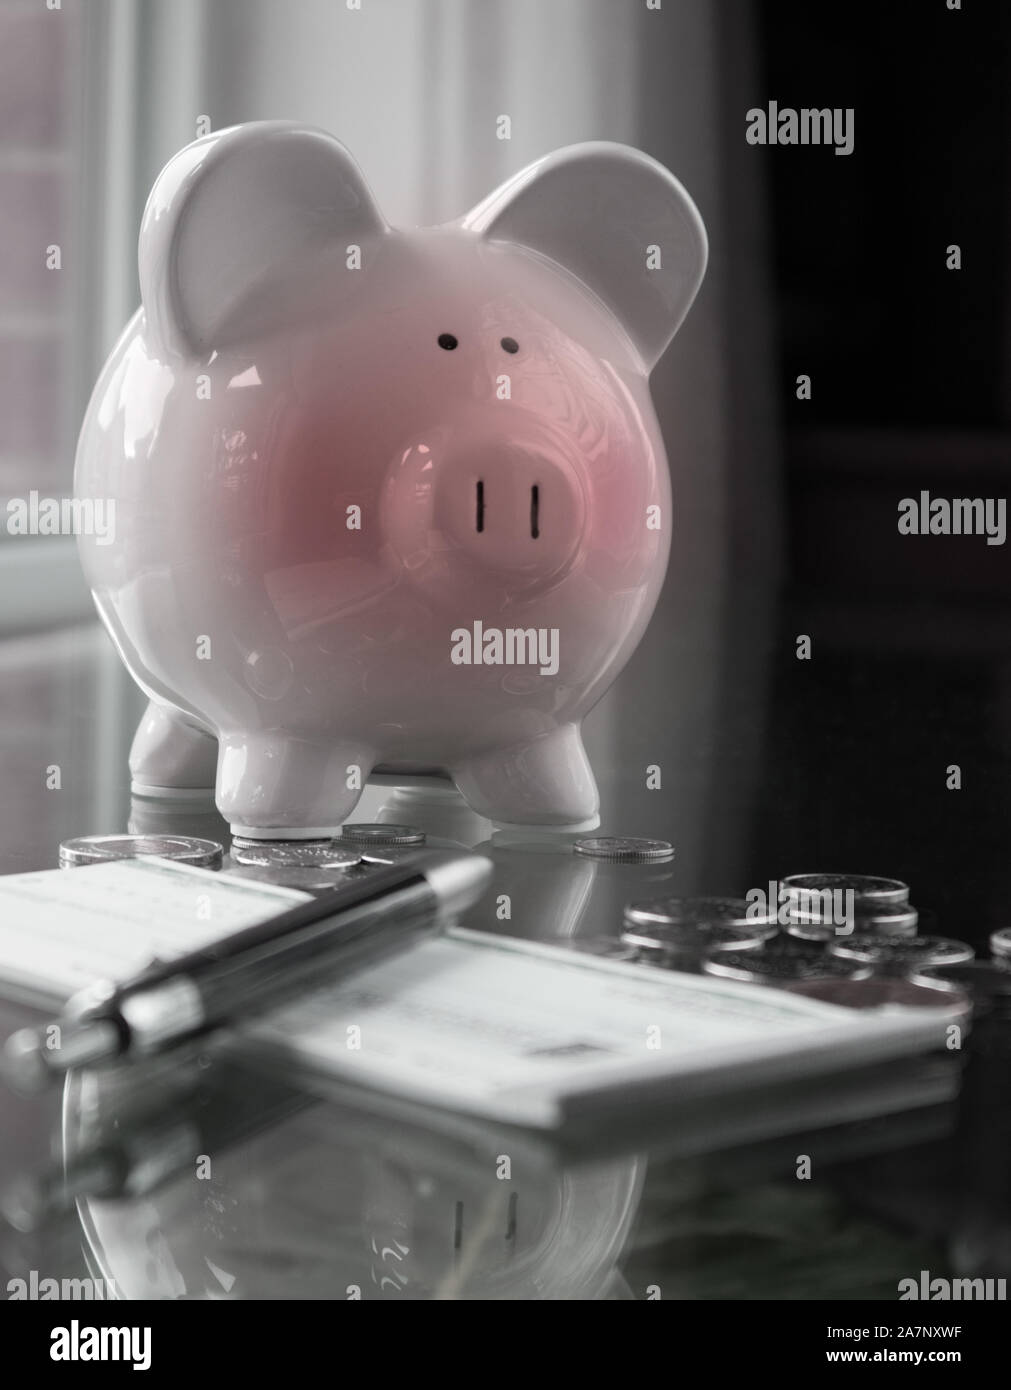 Piggy bank, totally embarrassed after giving his meager savings to his owner .. Stock Photo